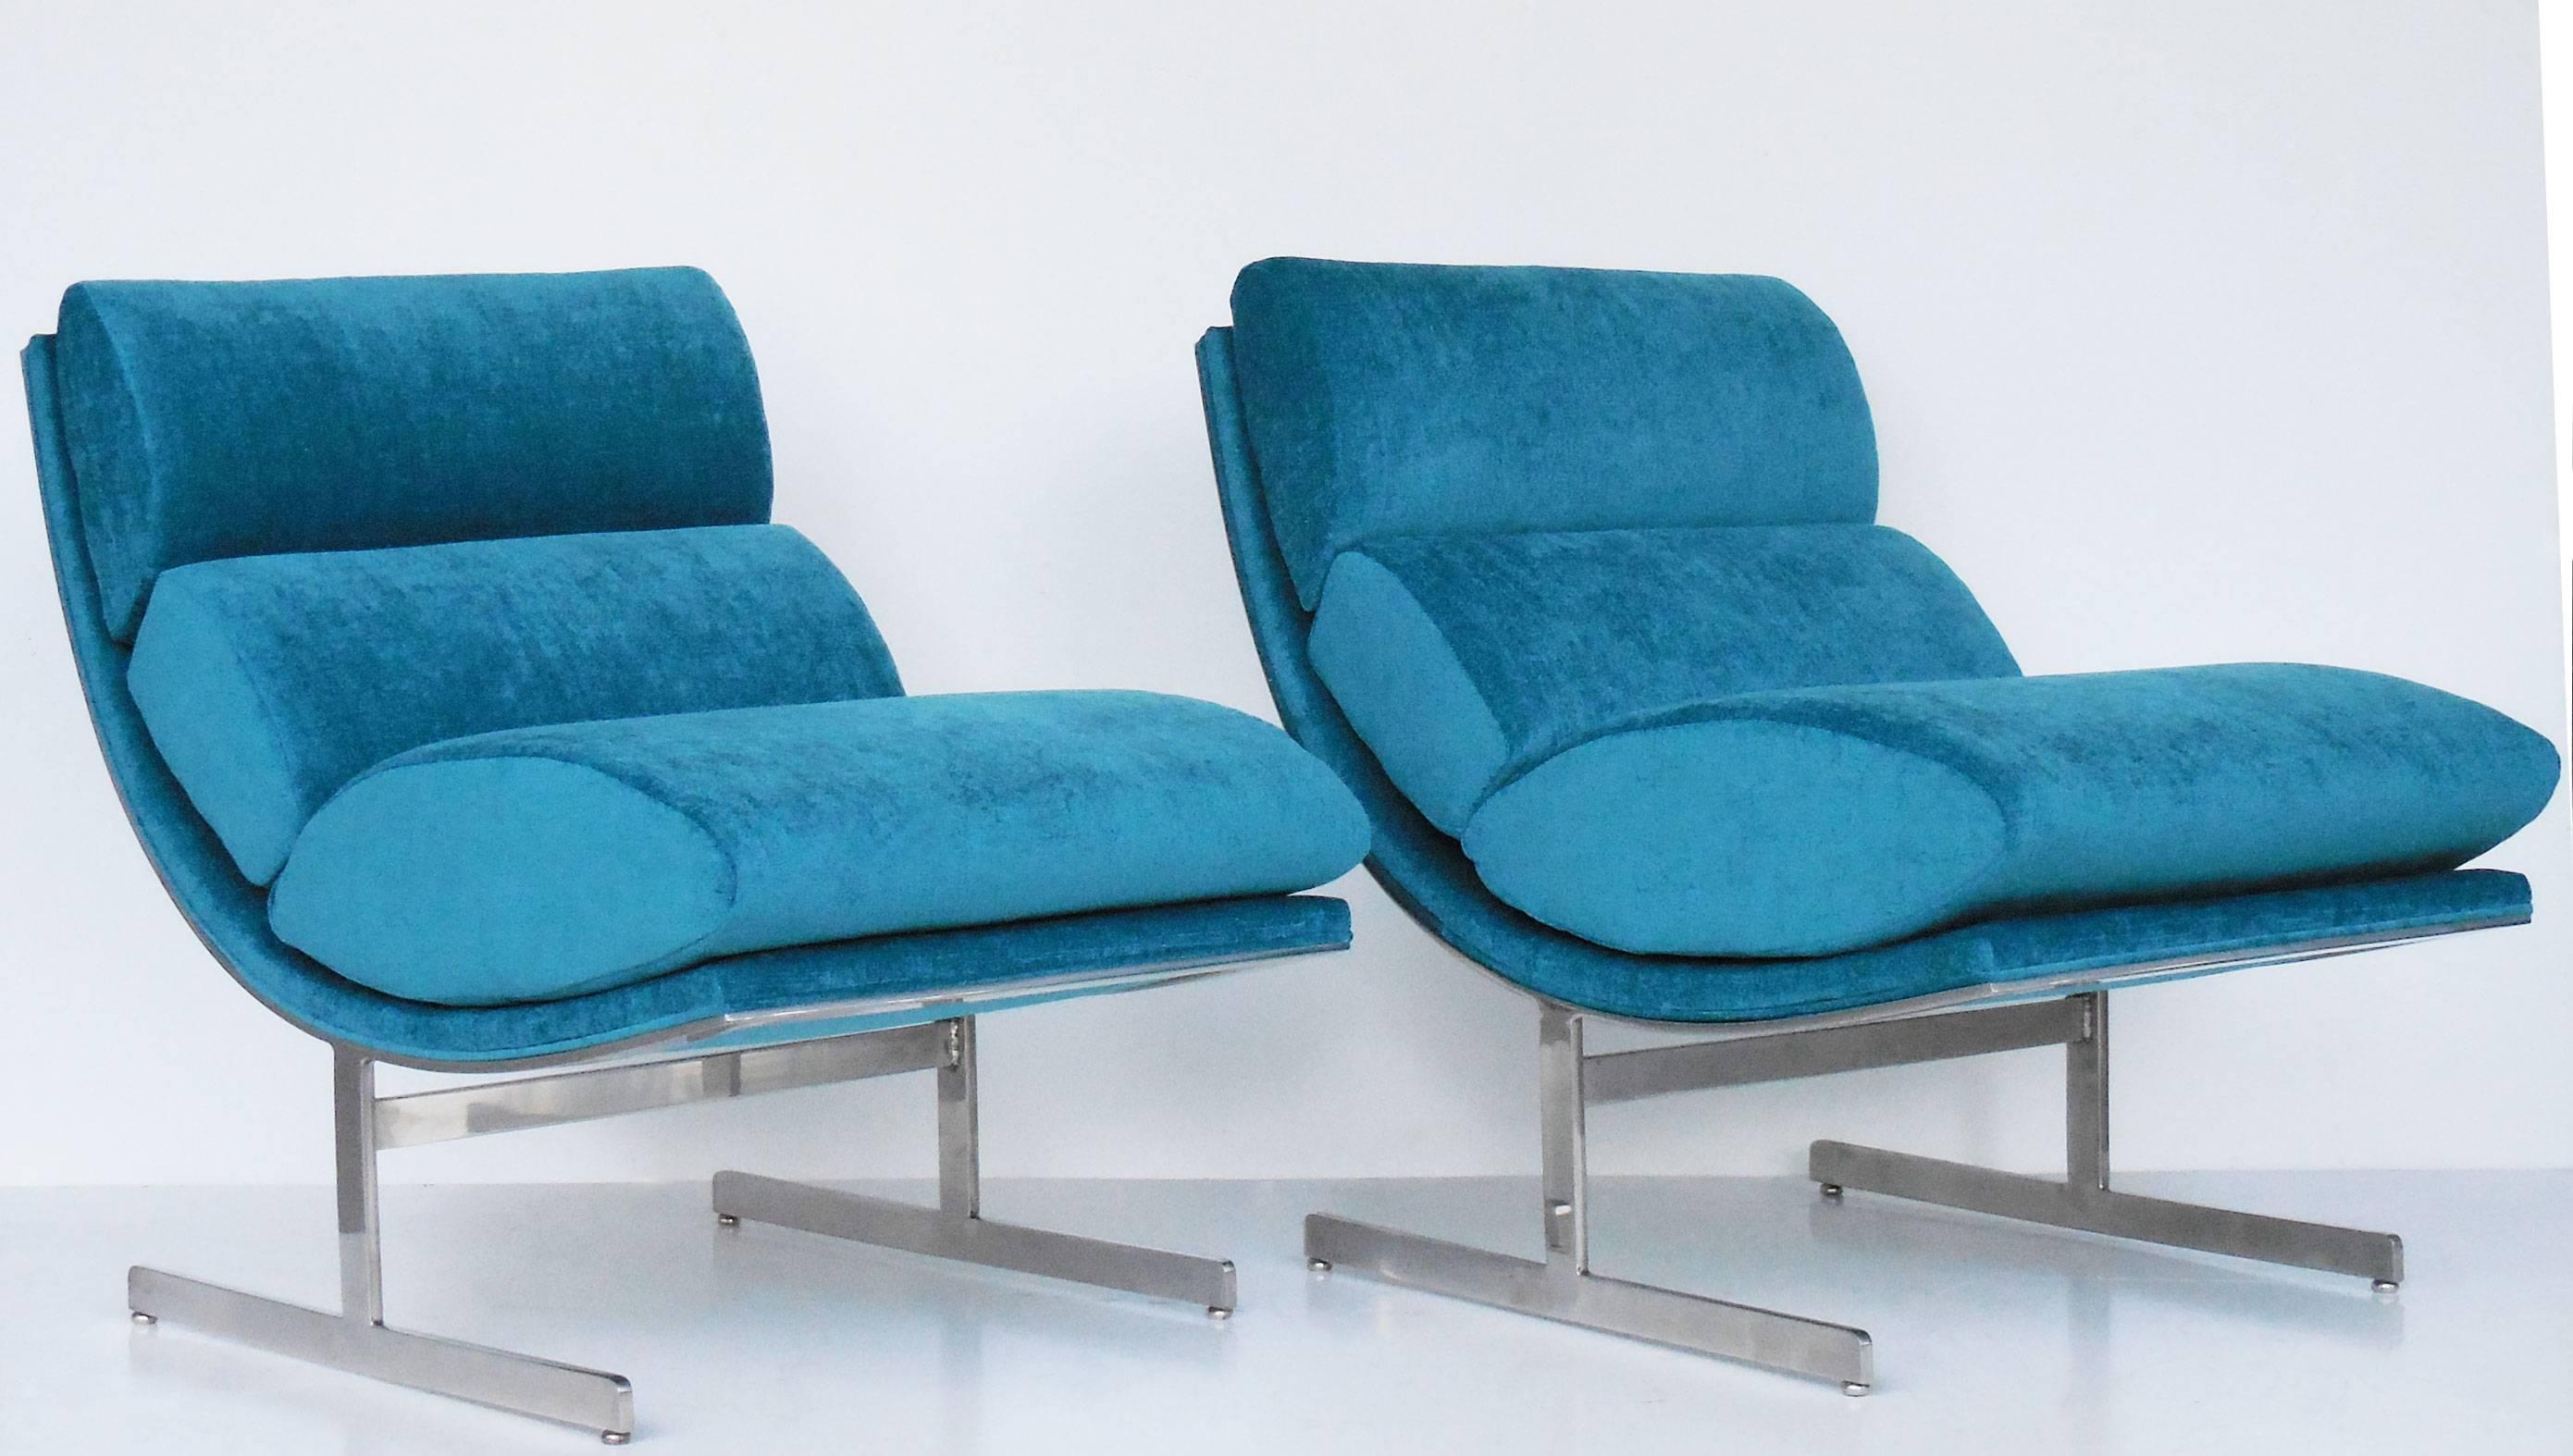 A pair of super stylish chairs by Kip Stewart for Directional. Solid stainless steel frames. New upholstery including new foam.